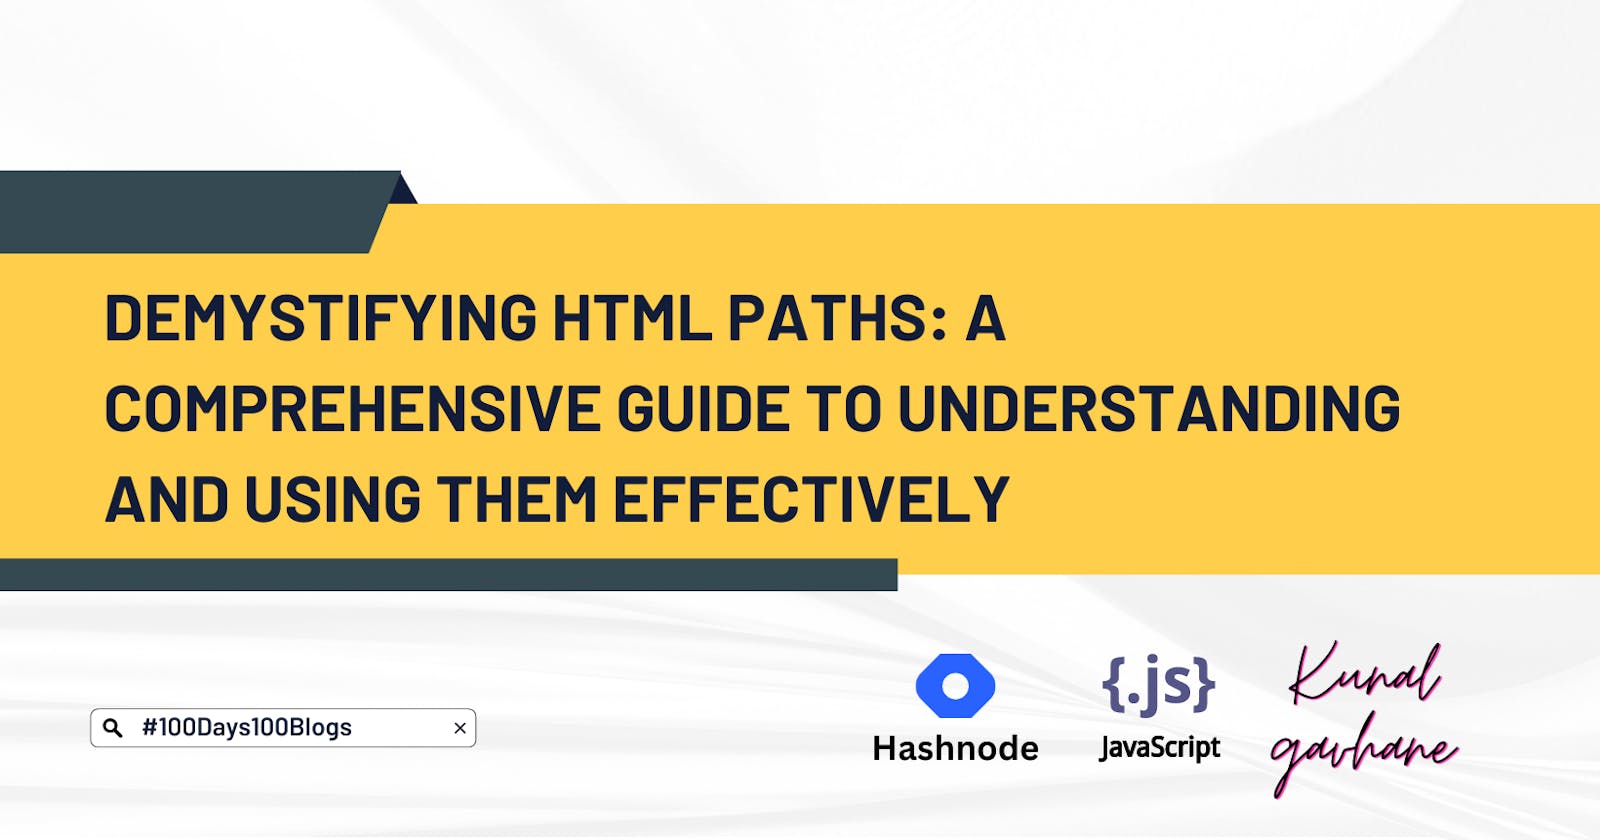 Demystifying HTML Paths: A Comprehensive Guide to Understanding and Using Them Effectively